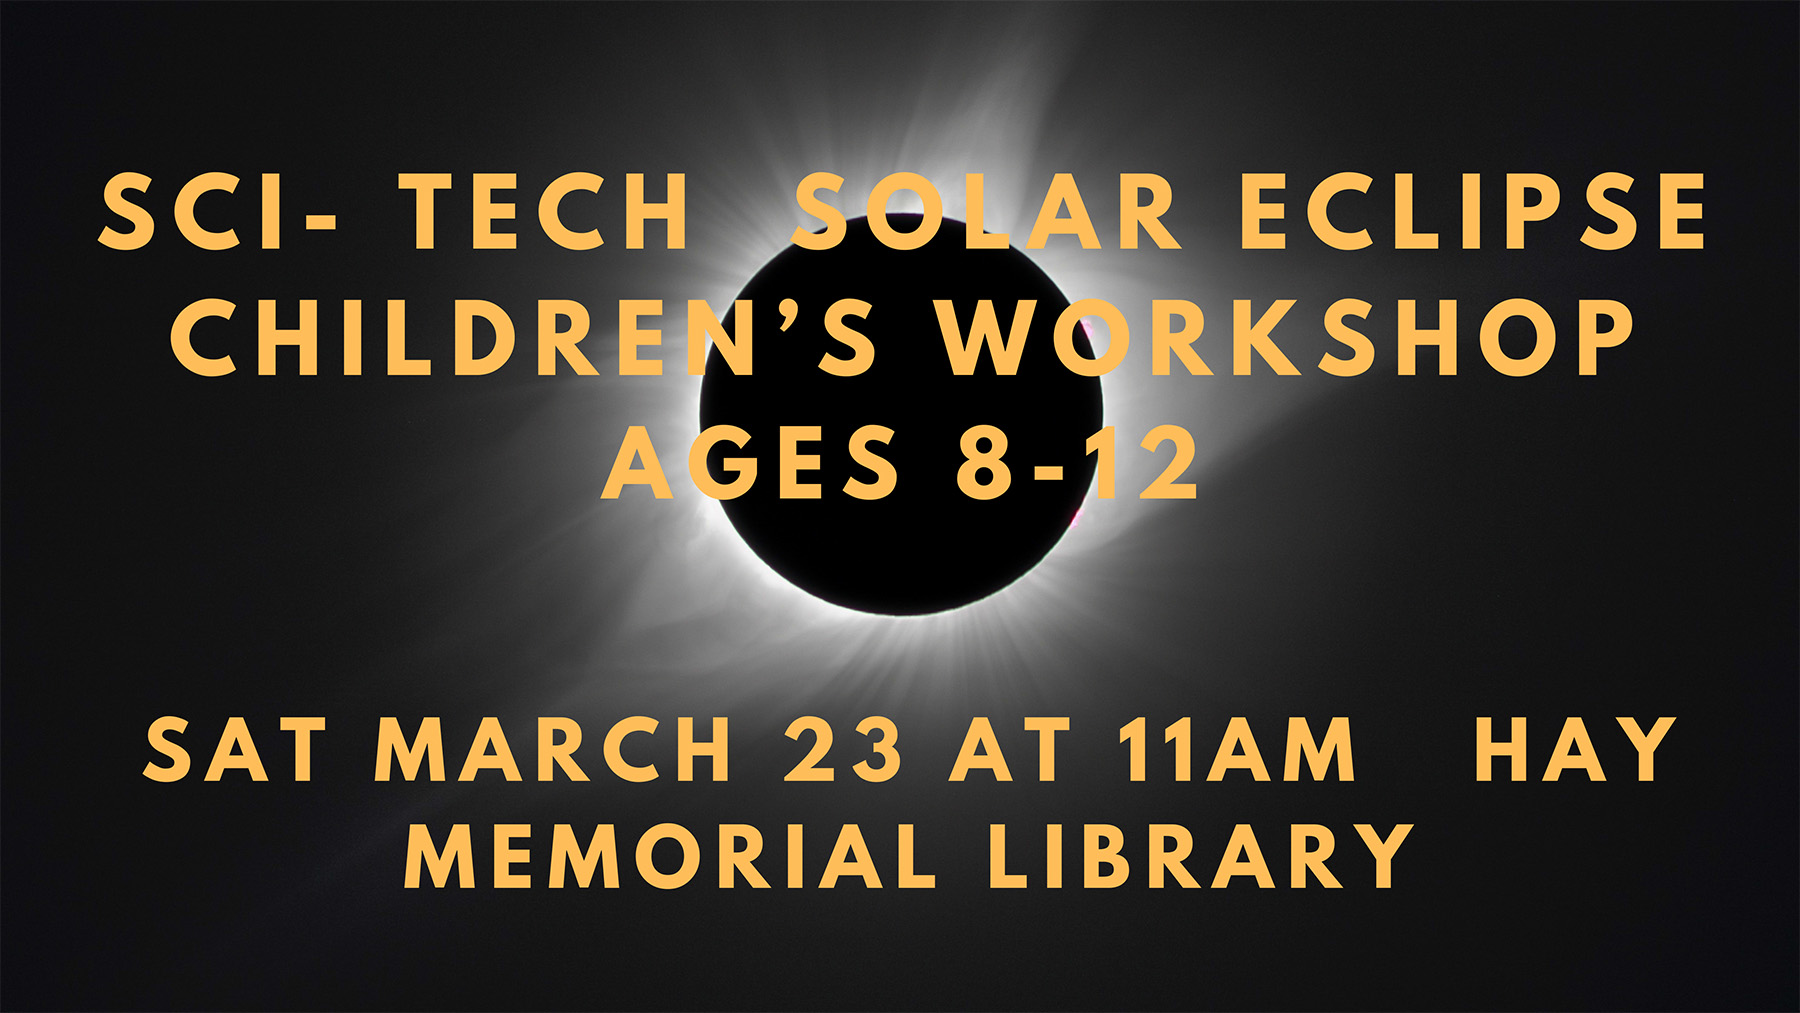 Flyer for the March 23rd Eclipse Workshop for Children at Hay Memorial Library in Sackets Harbor